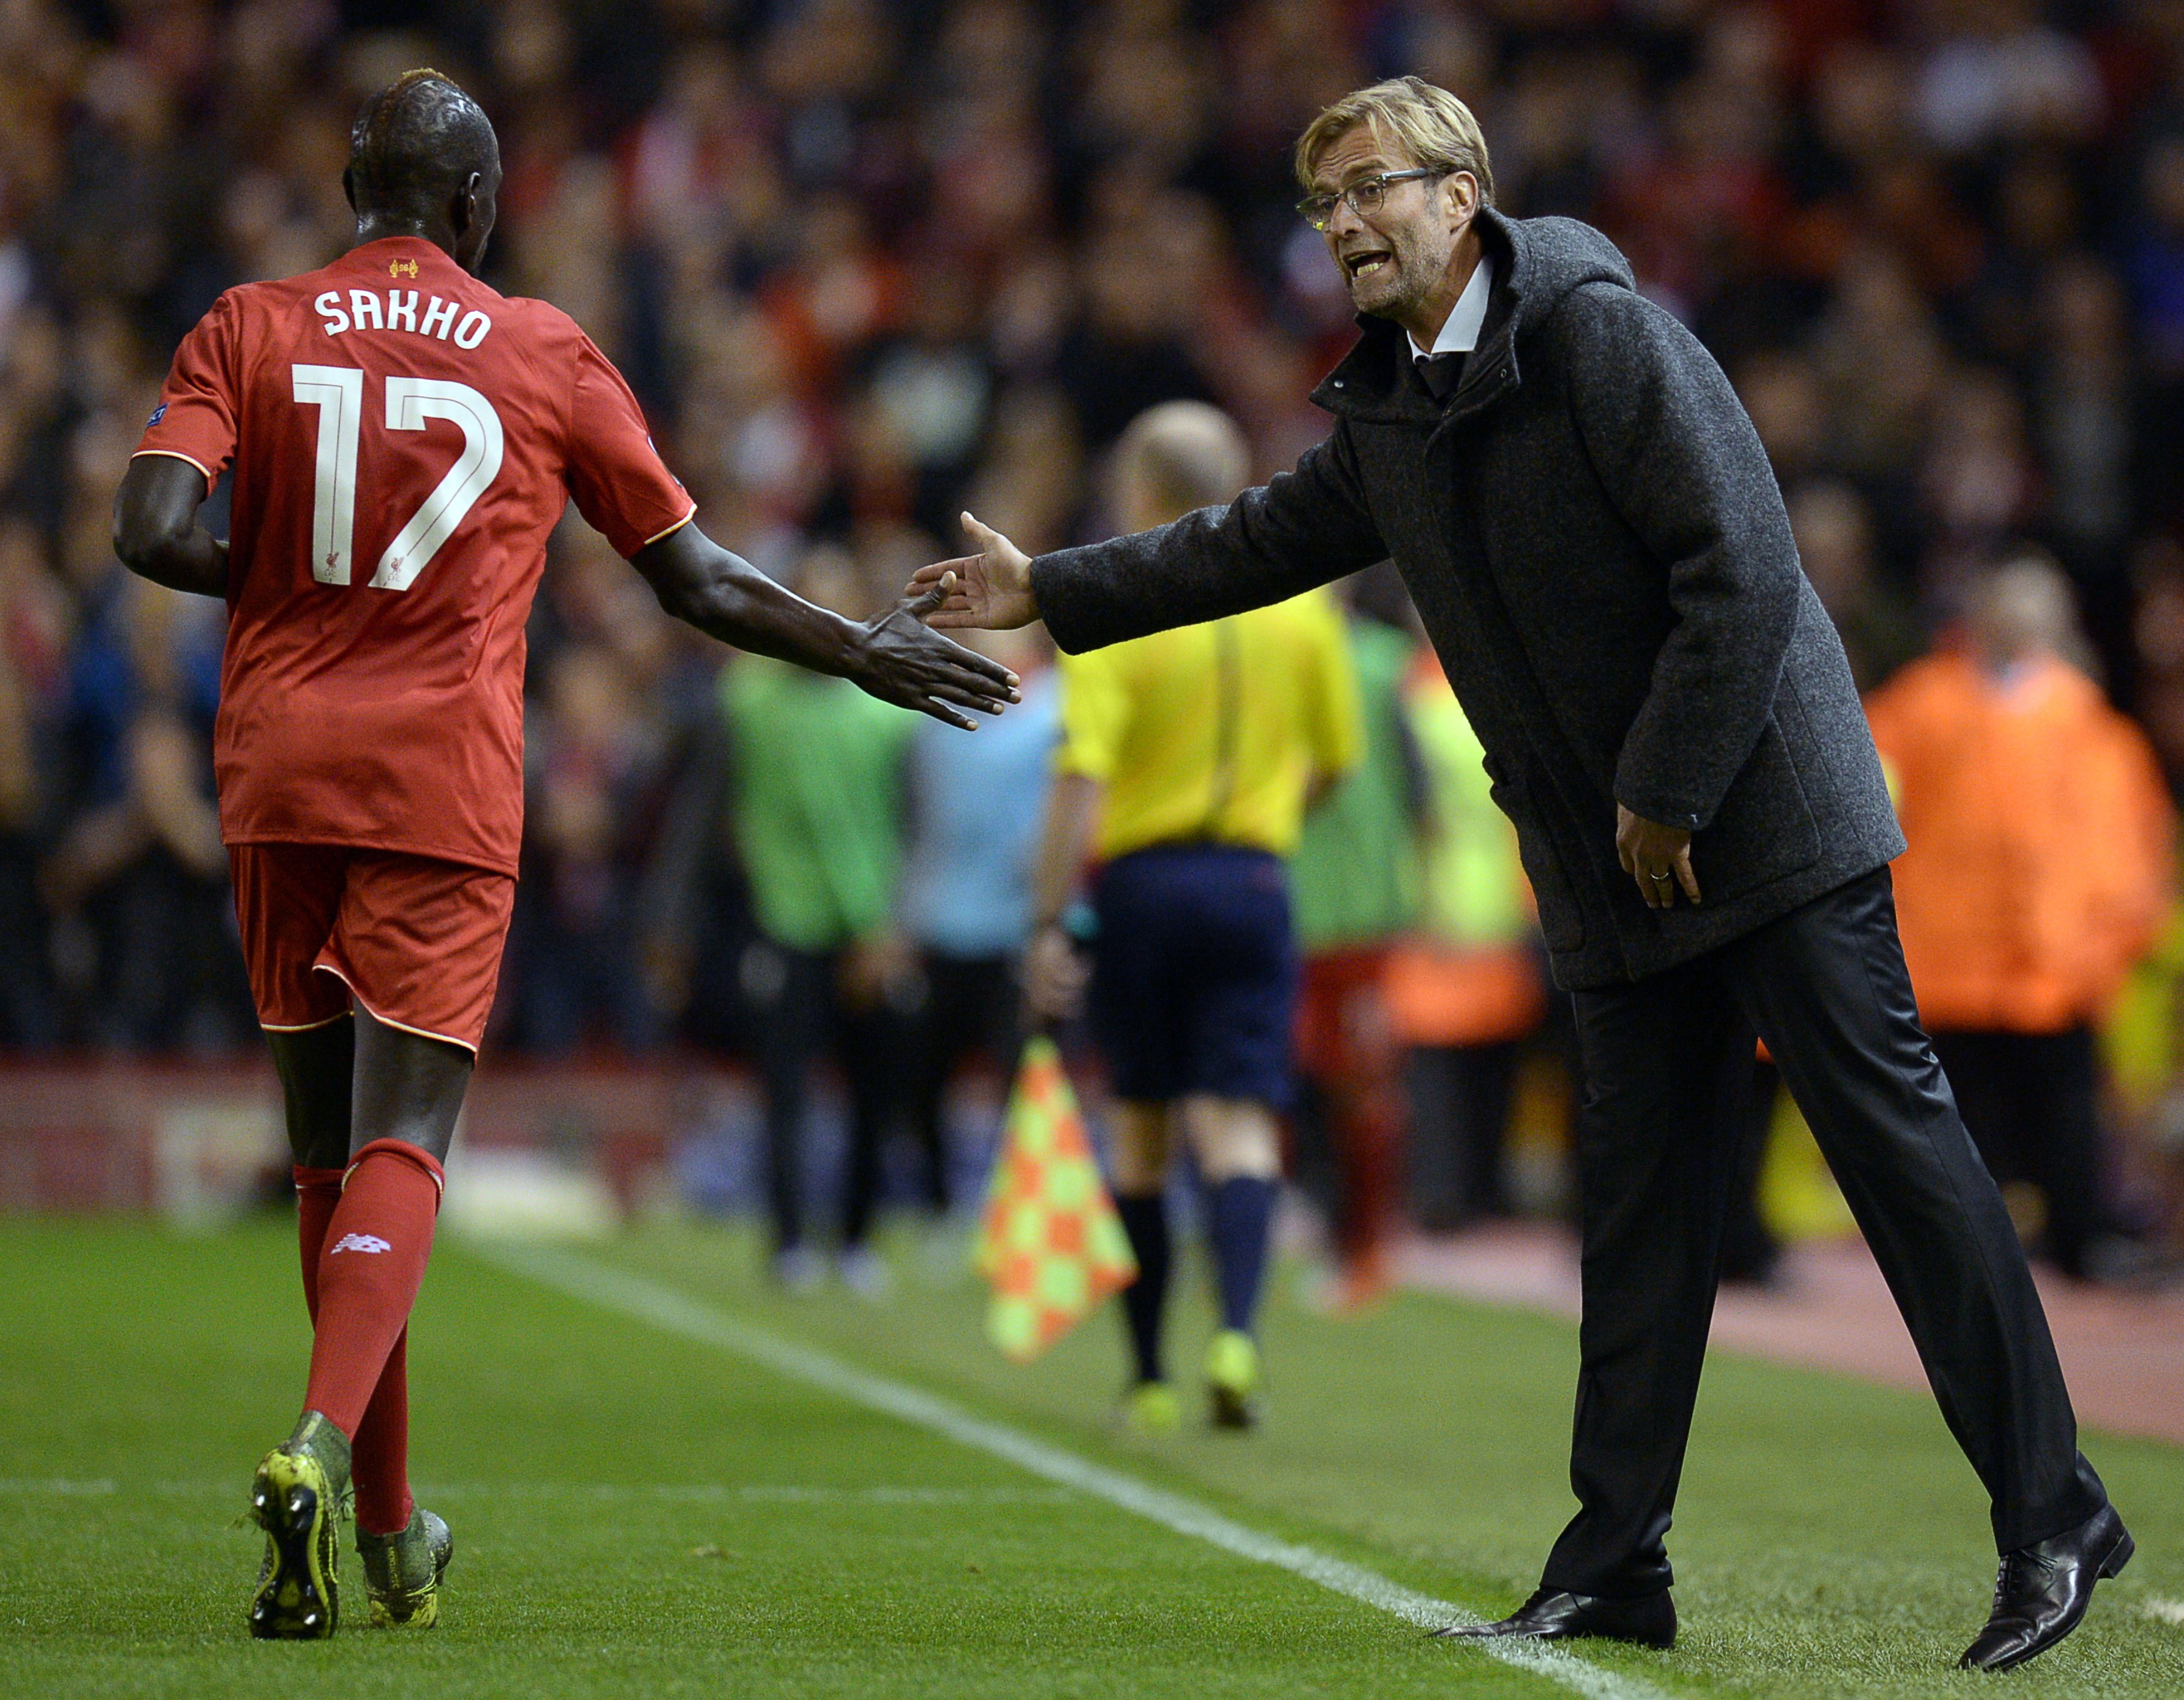 Liverpool's German manager  Jurgen Klopp (R) taps hands with Liverpool's French defender Mamadou Sakho  during a UEFA Europa League group B football match between Liverpool FC and FC Rubin Kazan at Anfield in Liverpool, north west England, on October 22, 2015.  AFP PHOTO / OLI SCARFF        (Photo credit should read OLI SCARFF/AFP/Getty Images)